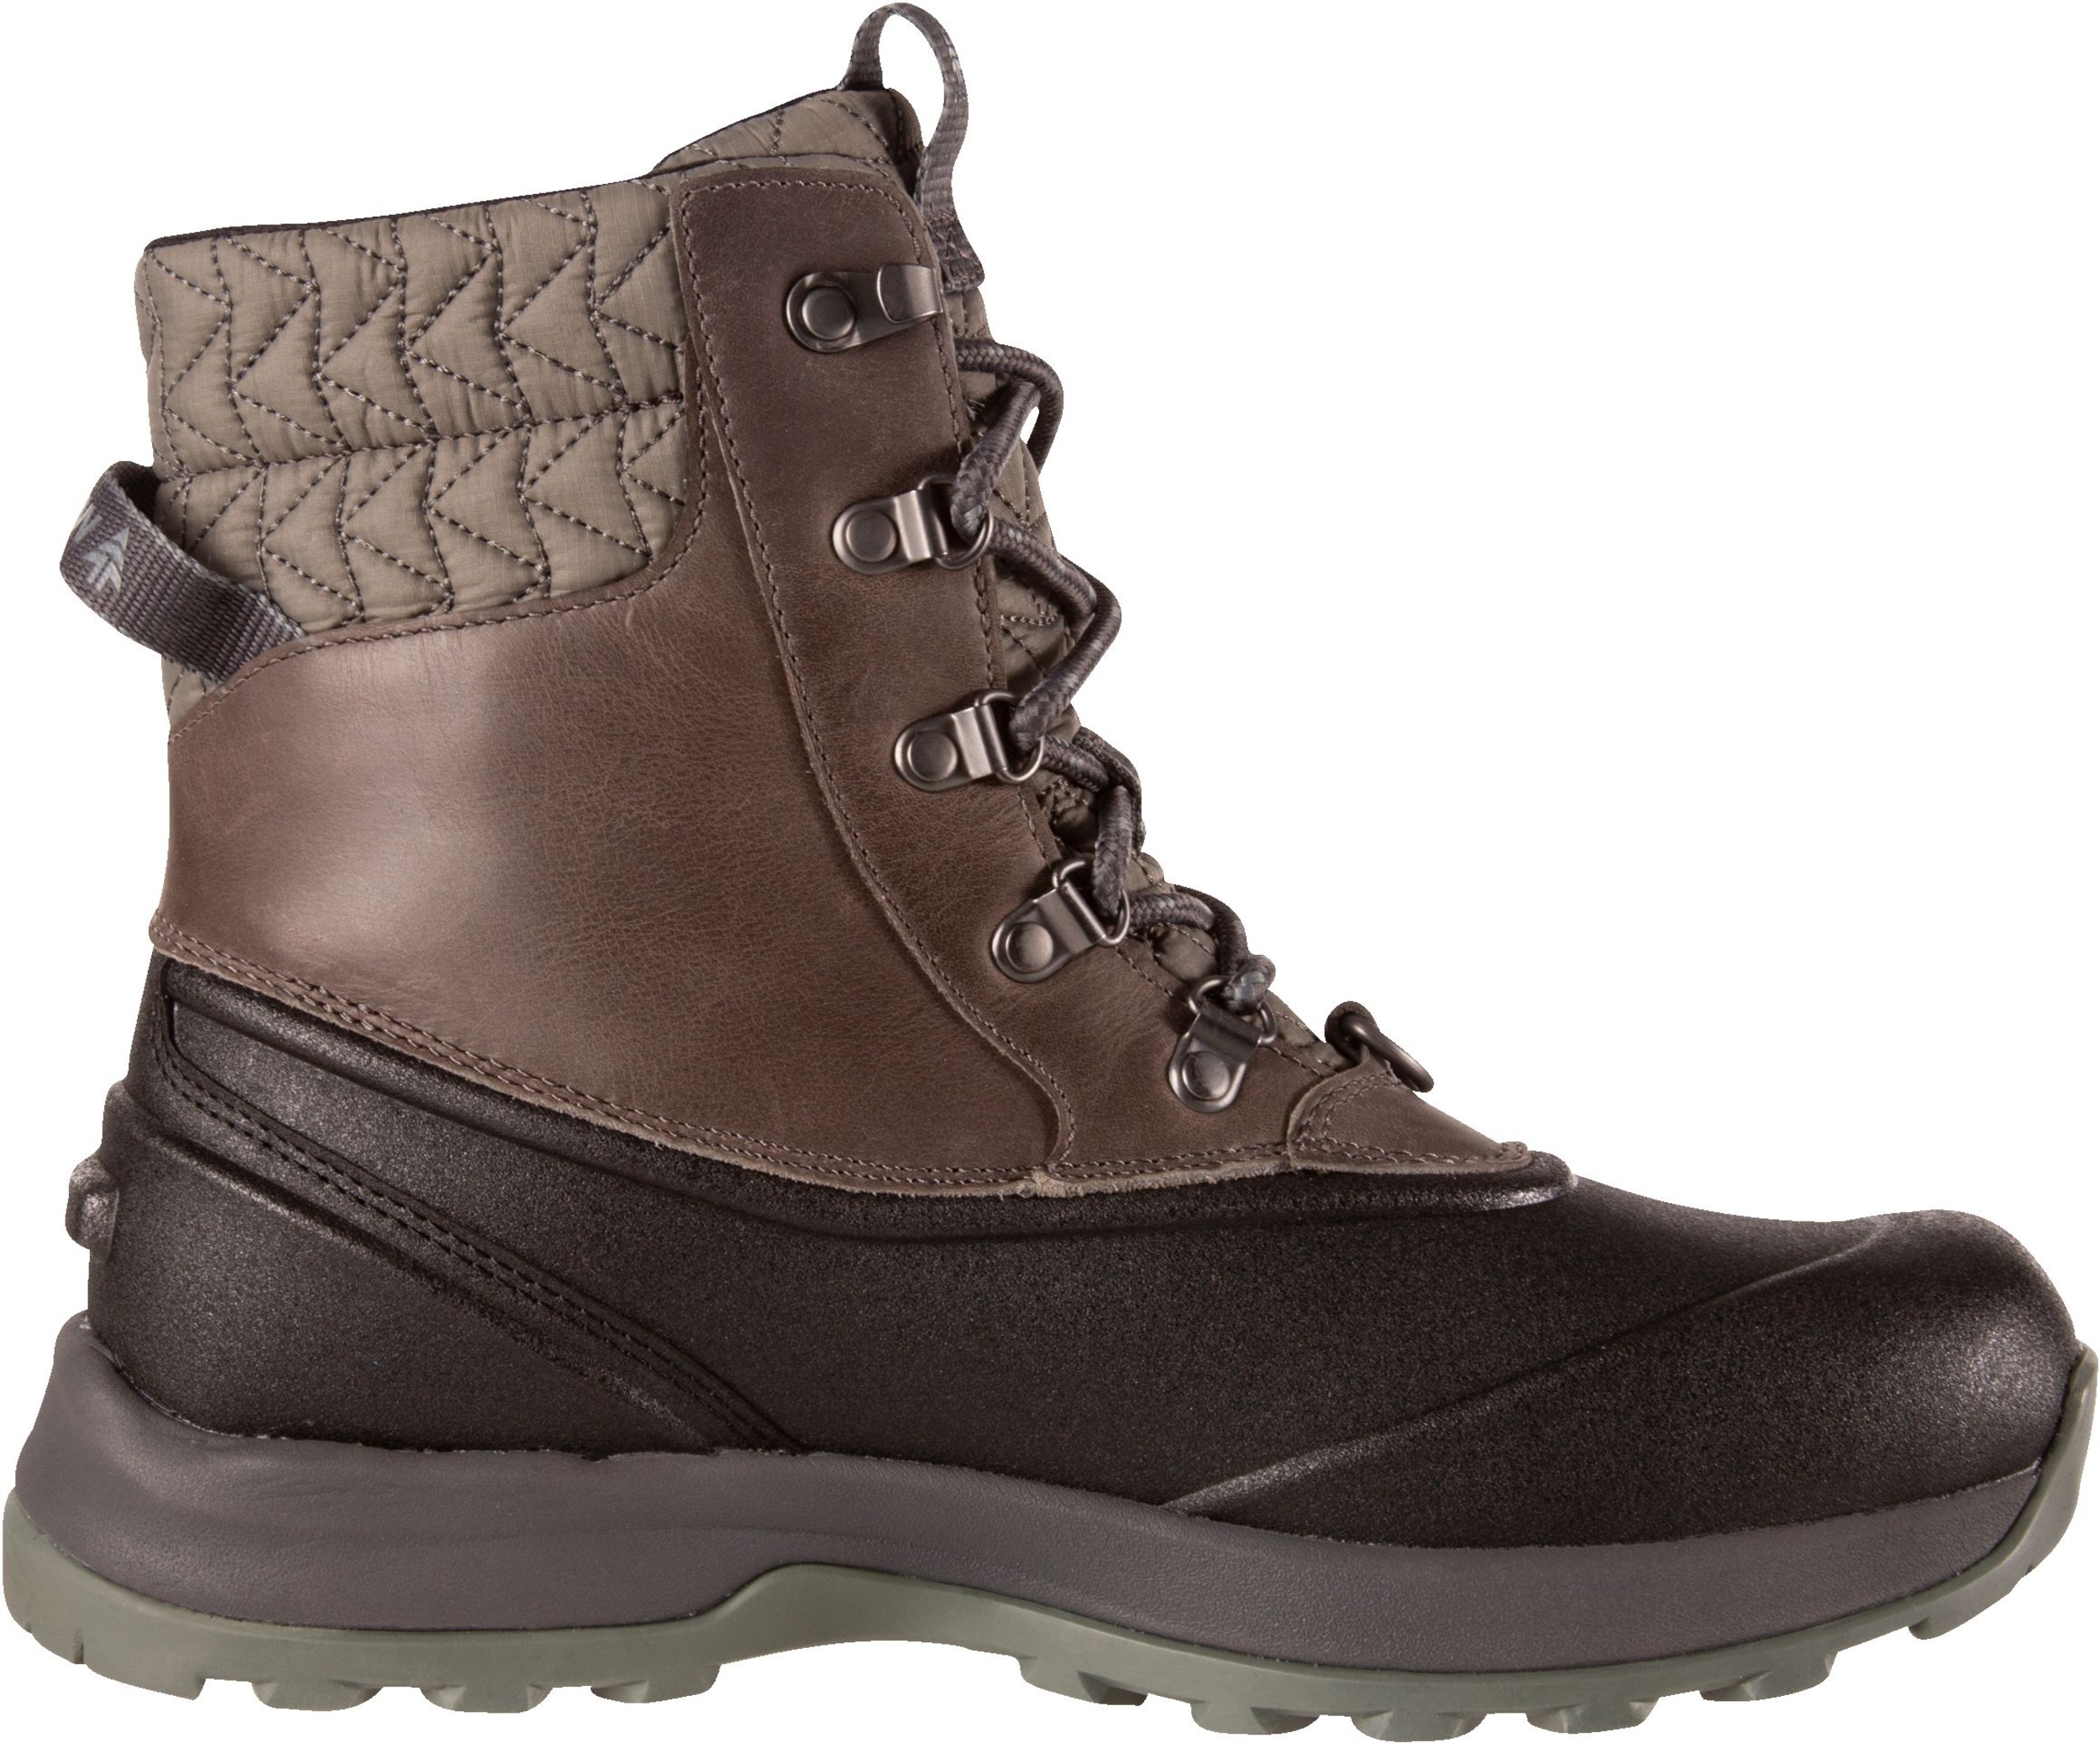 Woods Women's IceFX Winter Boots, Waterproof, Non Slip, Leather ...